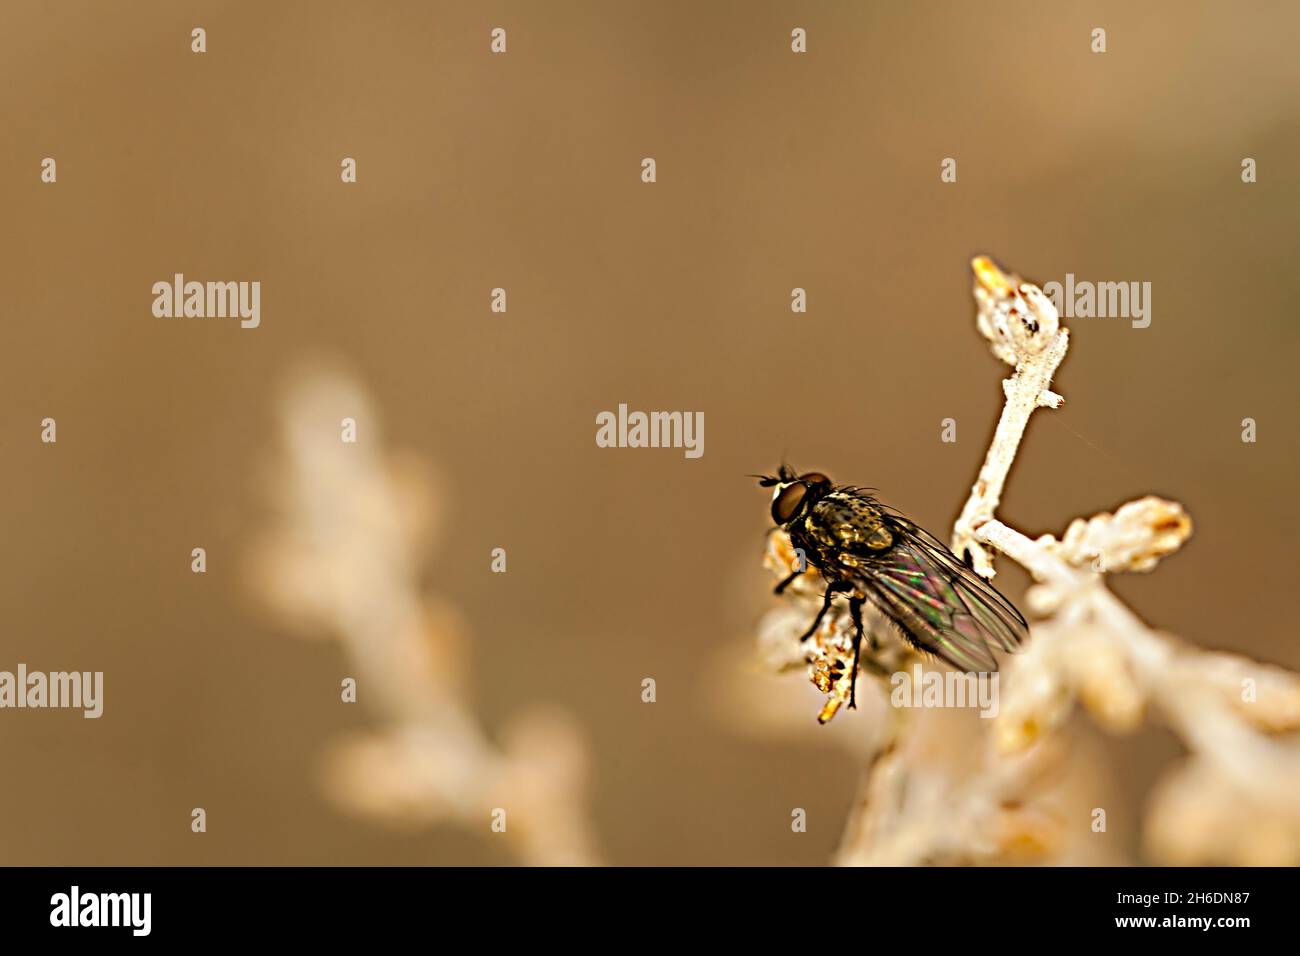 Dipteros, Insects in their natural environment. Macro photography. Stock Photo